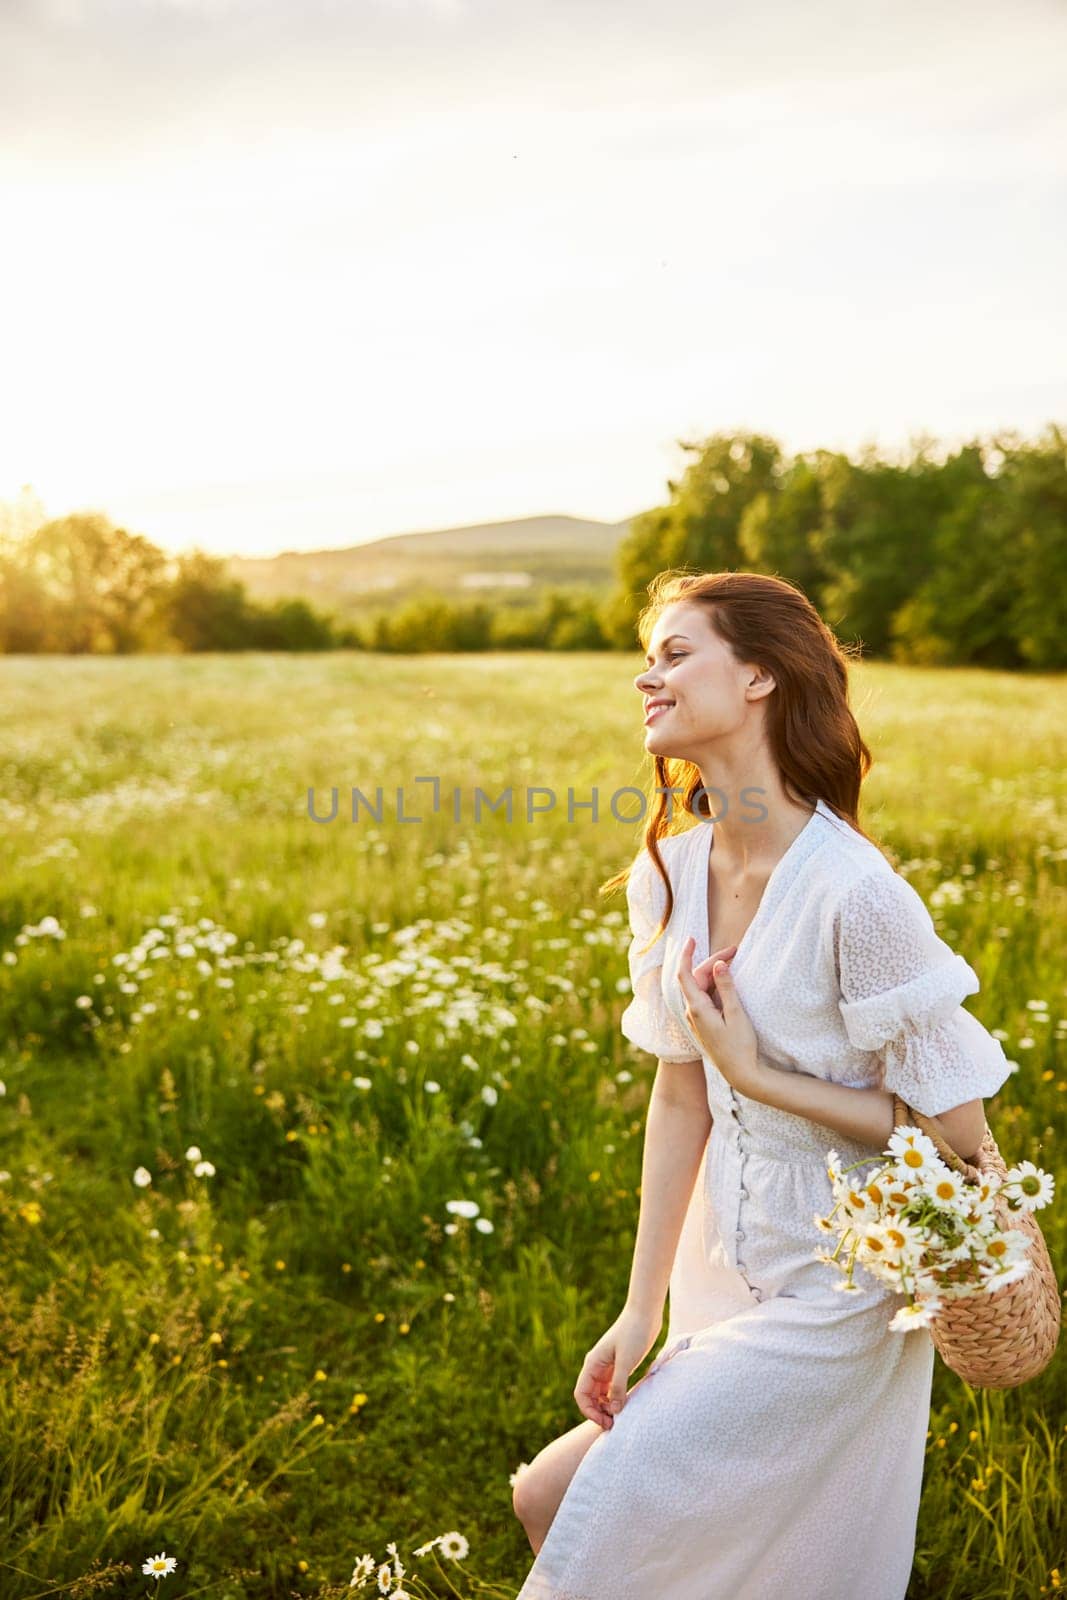 vertical portrait of a beautiful woman in a light dress with a basket full of daisies in nature by Vichizh